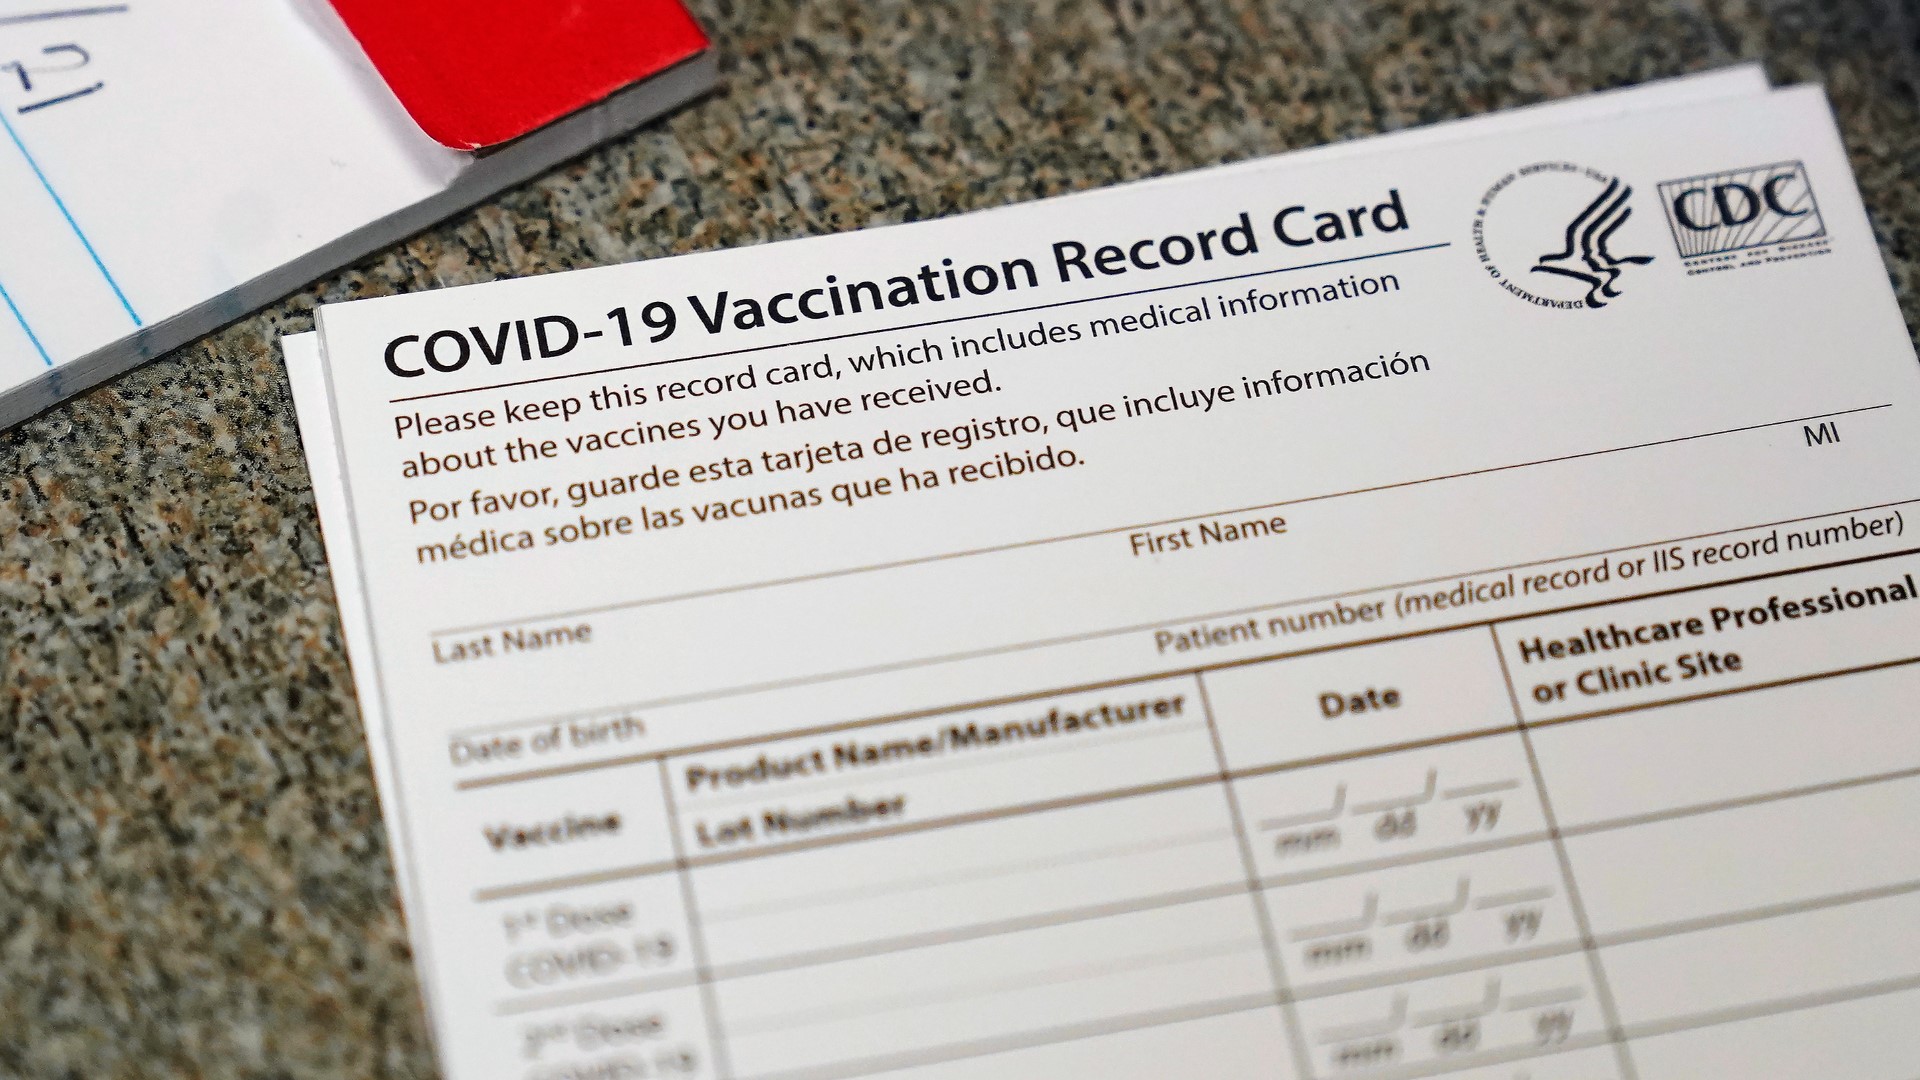 Customers who want to dine indoors, attend gyms, movie theaters or even large outdoor events will have to show proof of vaccination or a negative COVID-19 test.